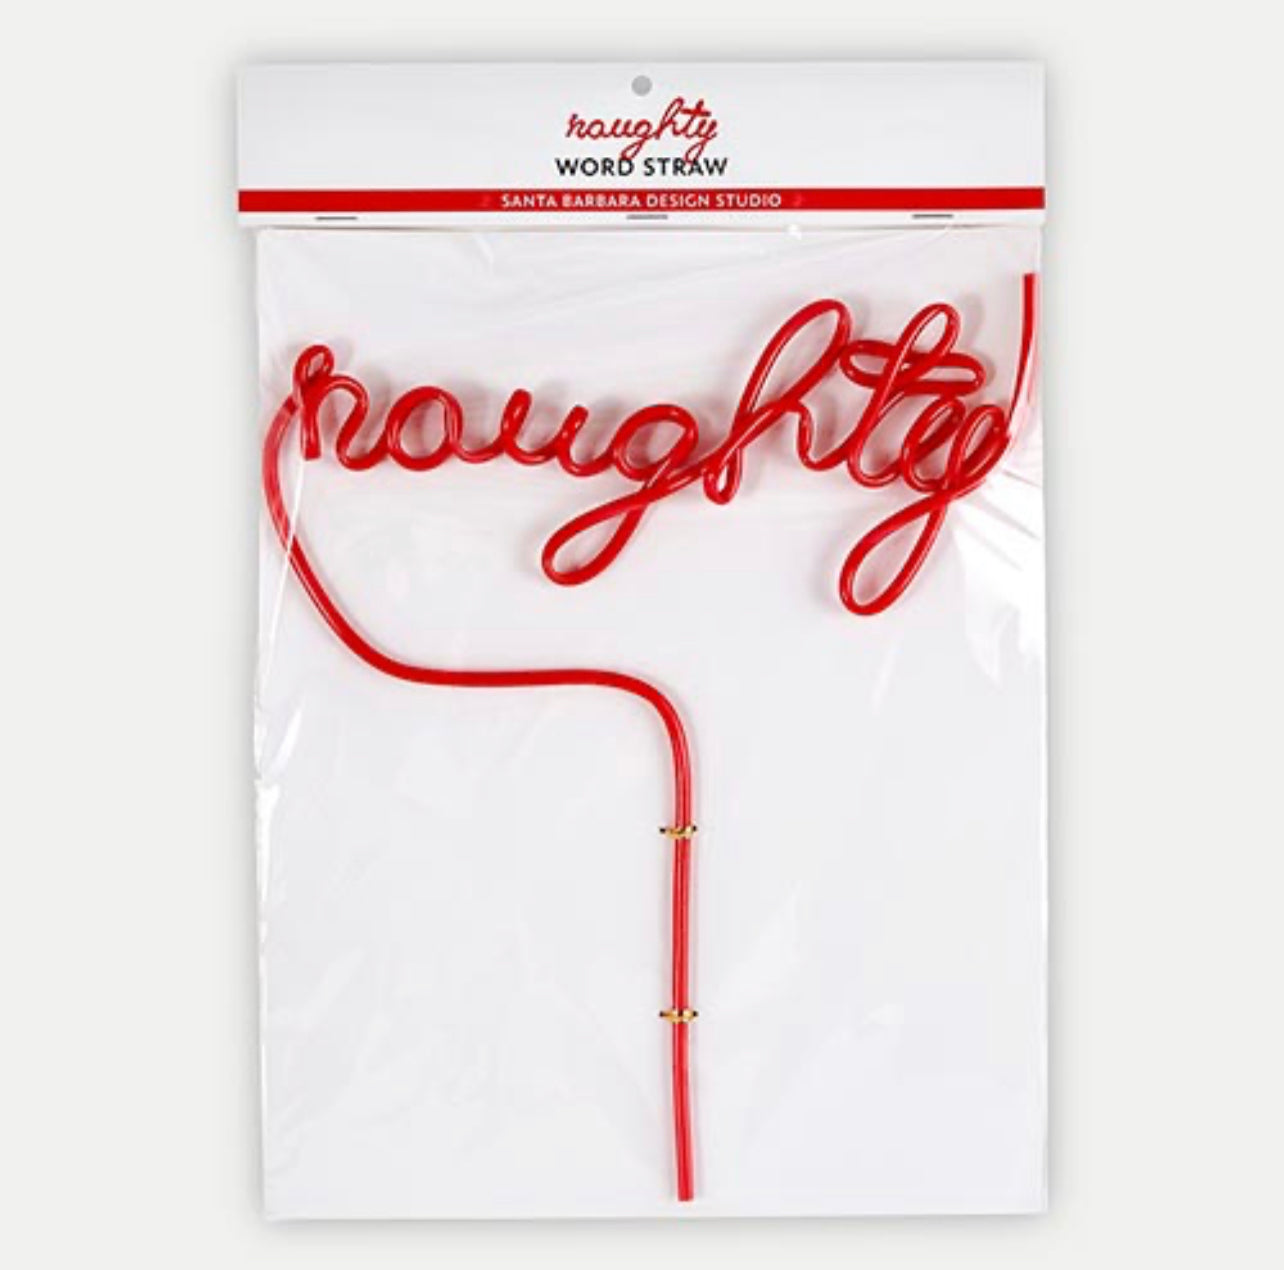 the red christmas word straw "naughty" comes in a festive red and white package